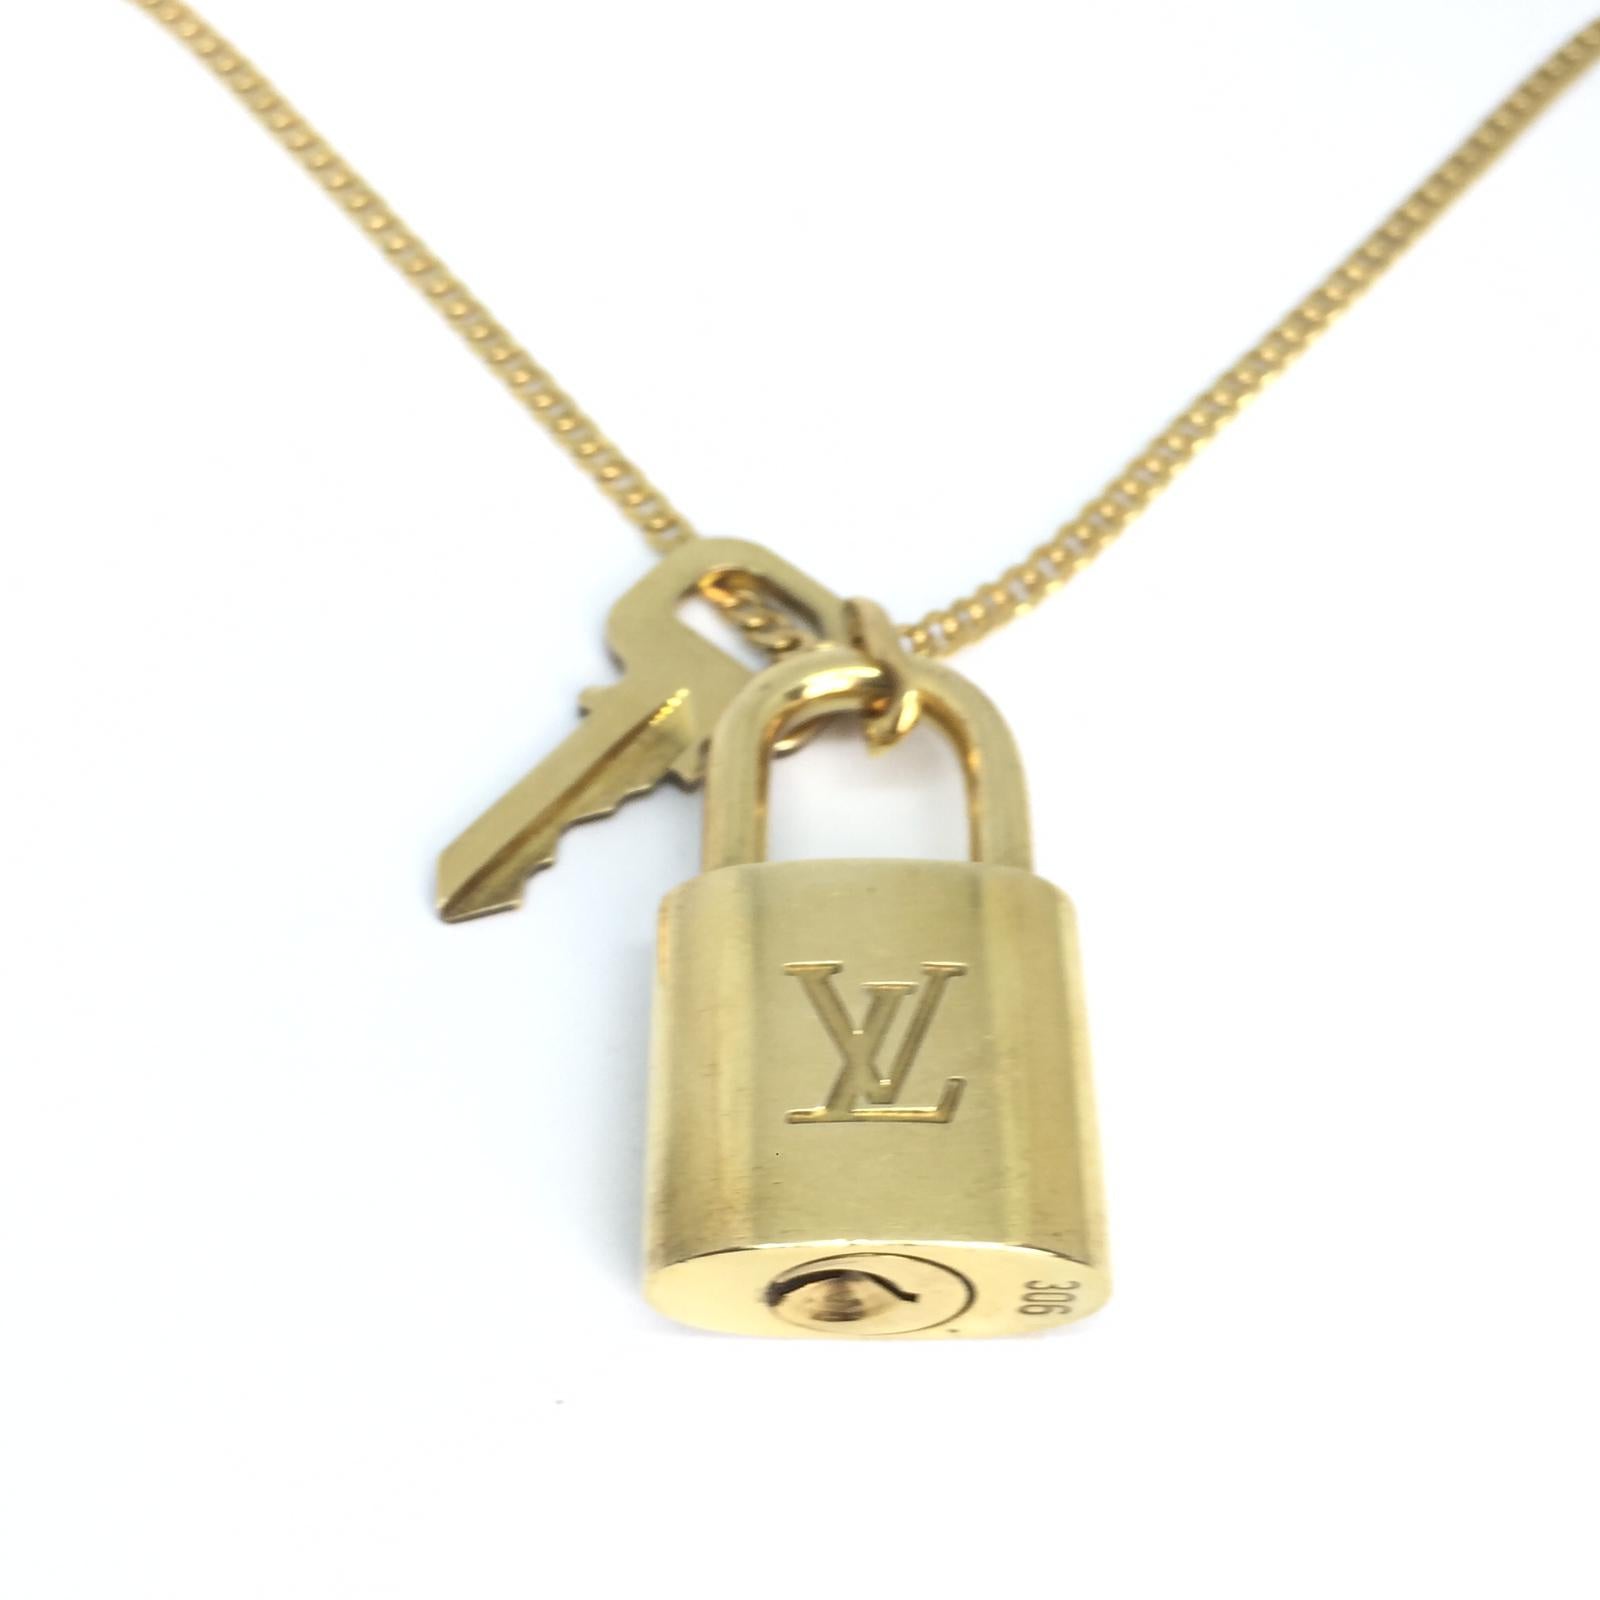 LOUIS VUITTON PADLOCK Necklace with Double Chain For Him £158.00 - PicClick  UK